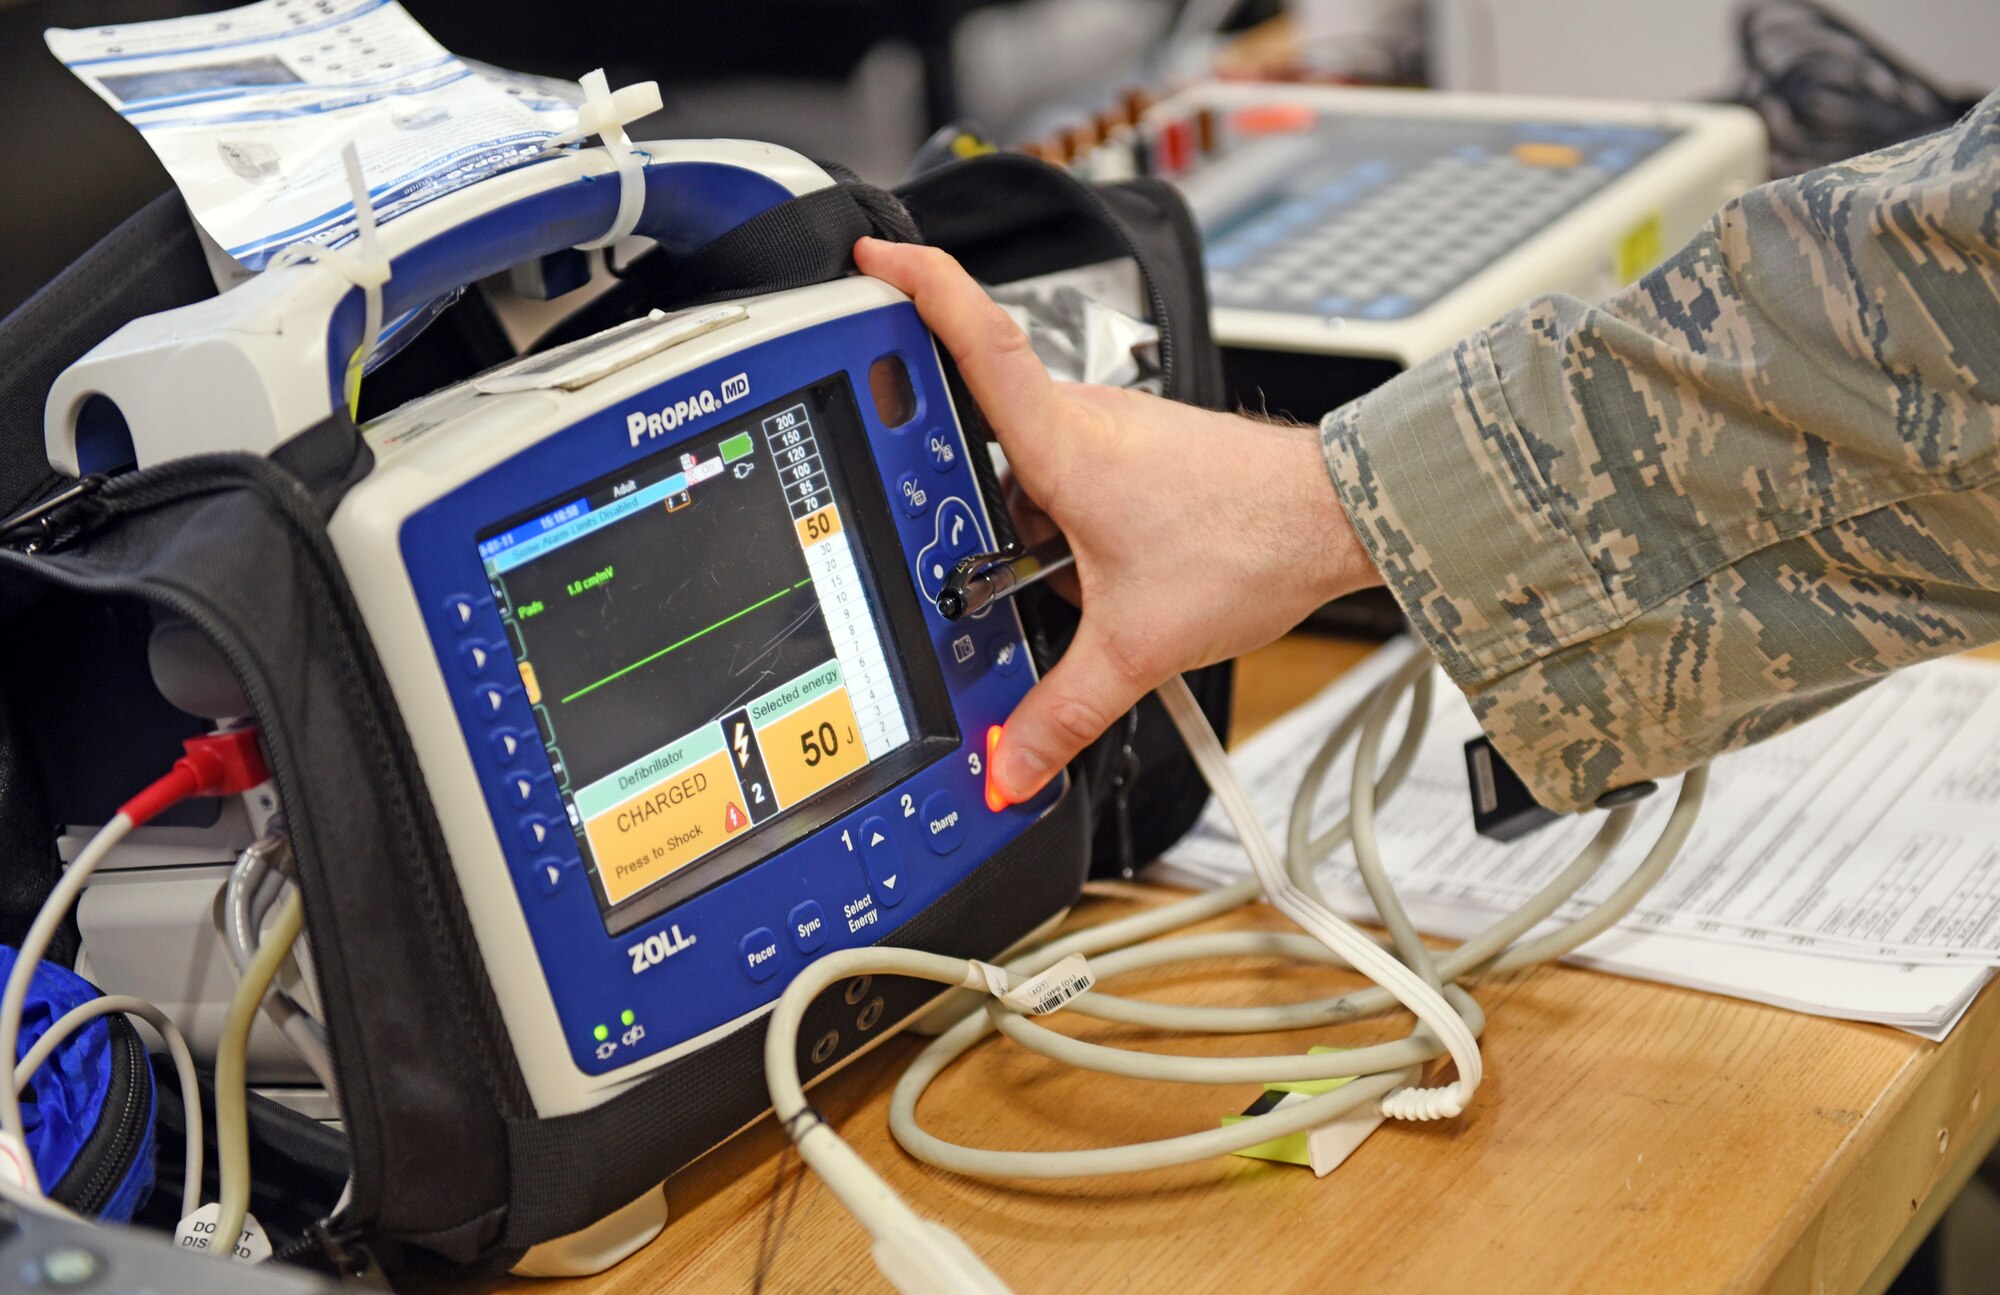 Airman 1st Class Jason McGhee, 375th Medical Support Squadron biomedical equipment technician, calibrates a patient monitor and defibrillator at the 375th Medical group Clinic, Scott Air Force Base, Ill. Jan. 11, 2019. As a member of the 375th Medical Equipment Repair Center, McGhee ensures equipment is calibrated and properly set up in efforts to take care of patients when they come into the hospital, ensuring the equipment serves its purpose. (Air Force photo by Airman 1st Class Chad Gorecki)